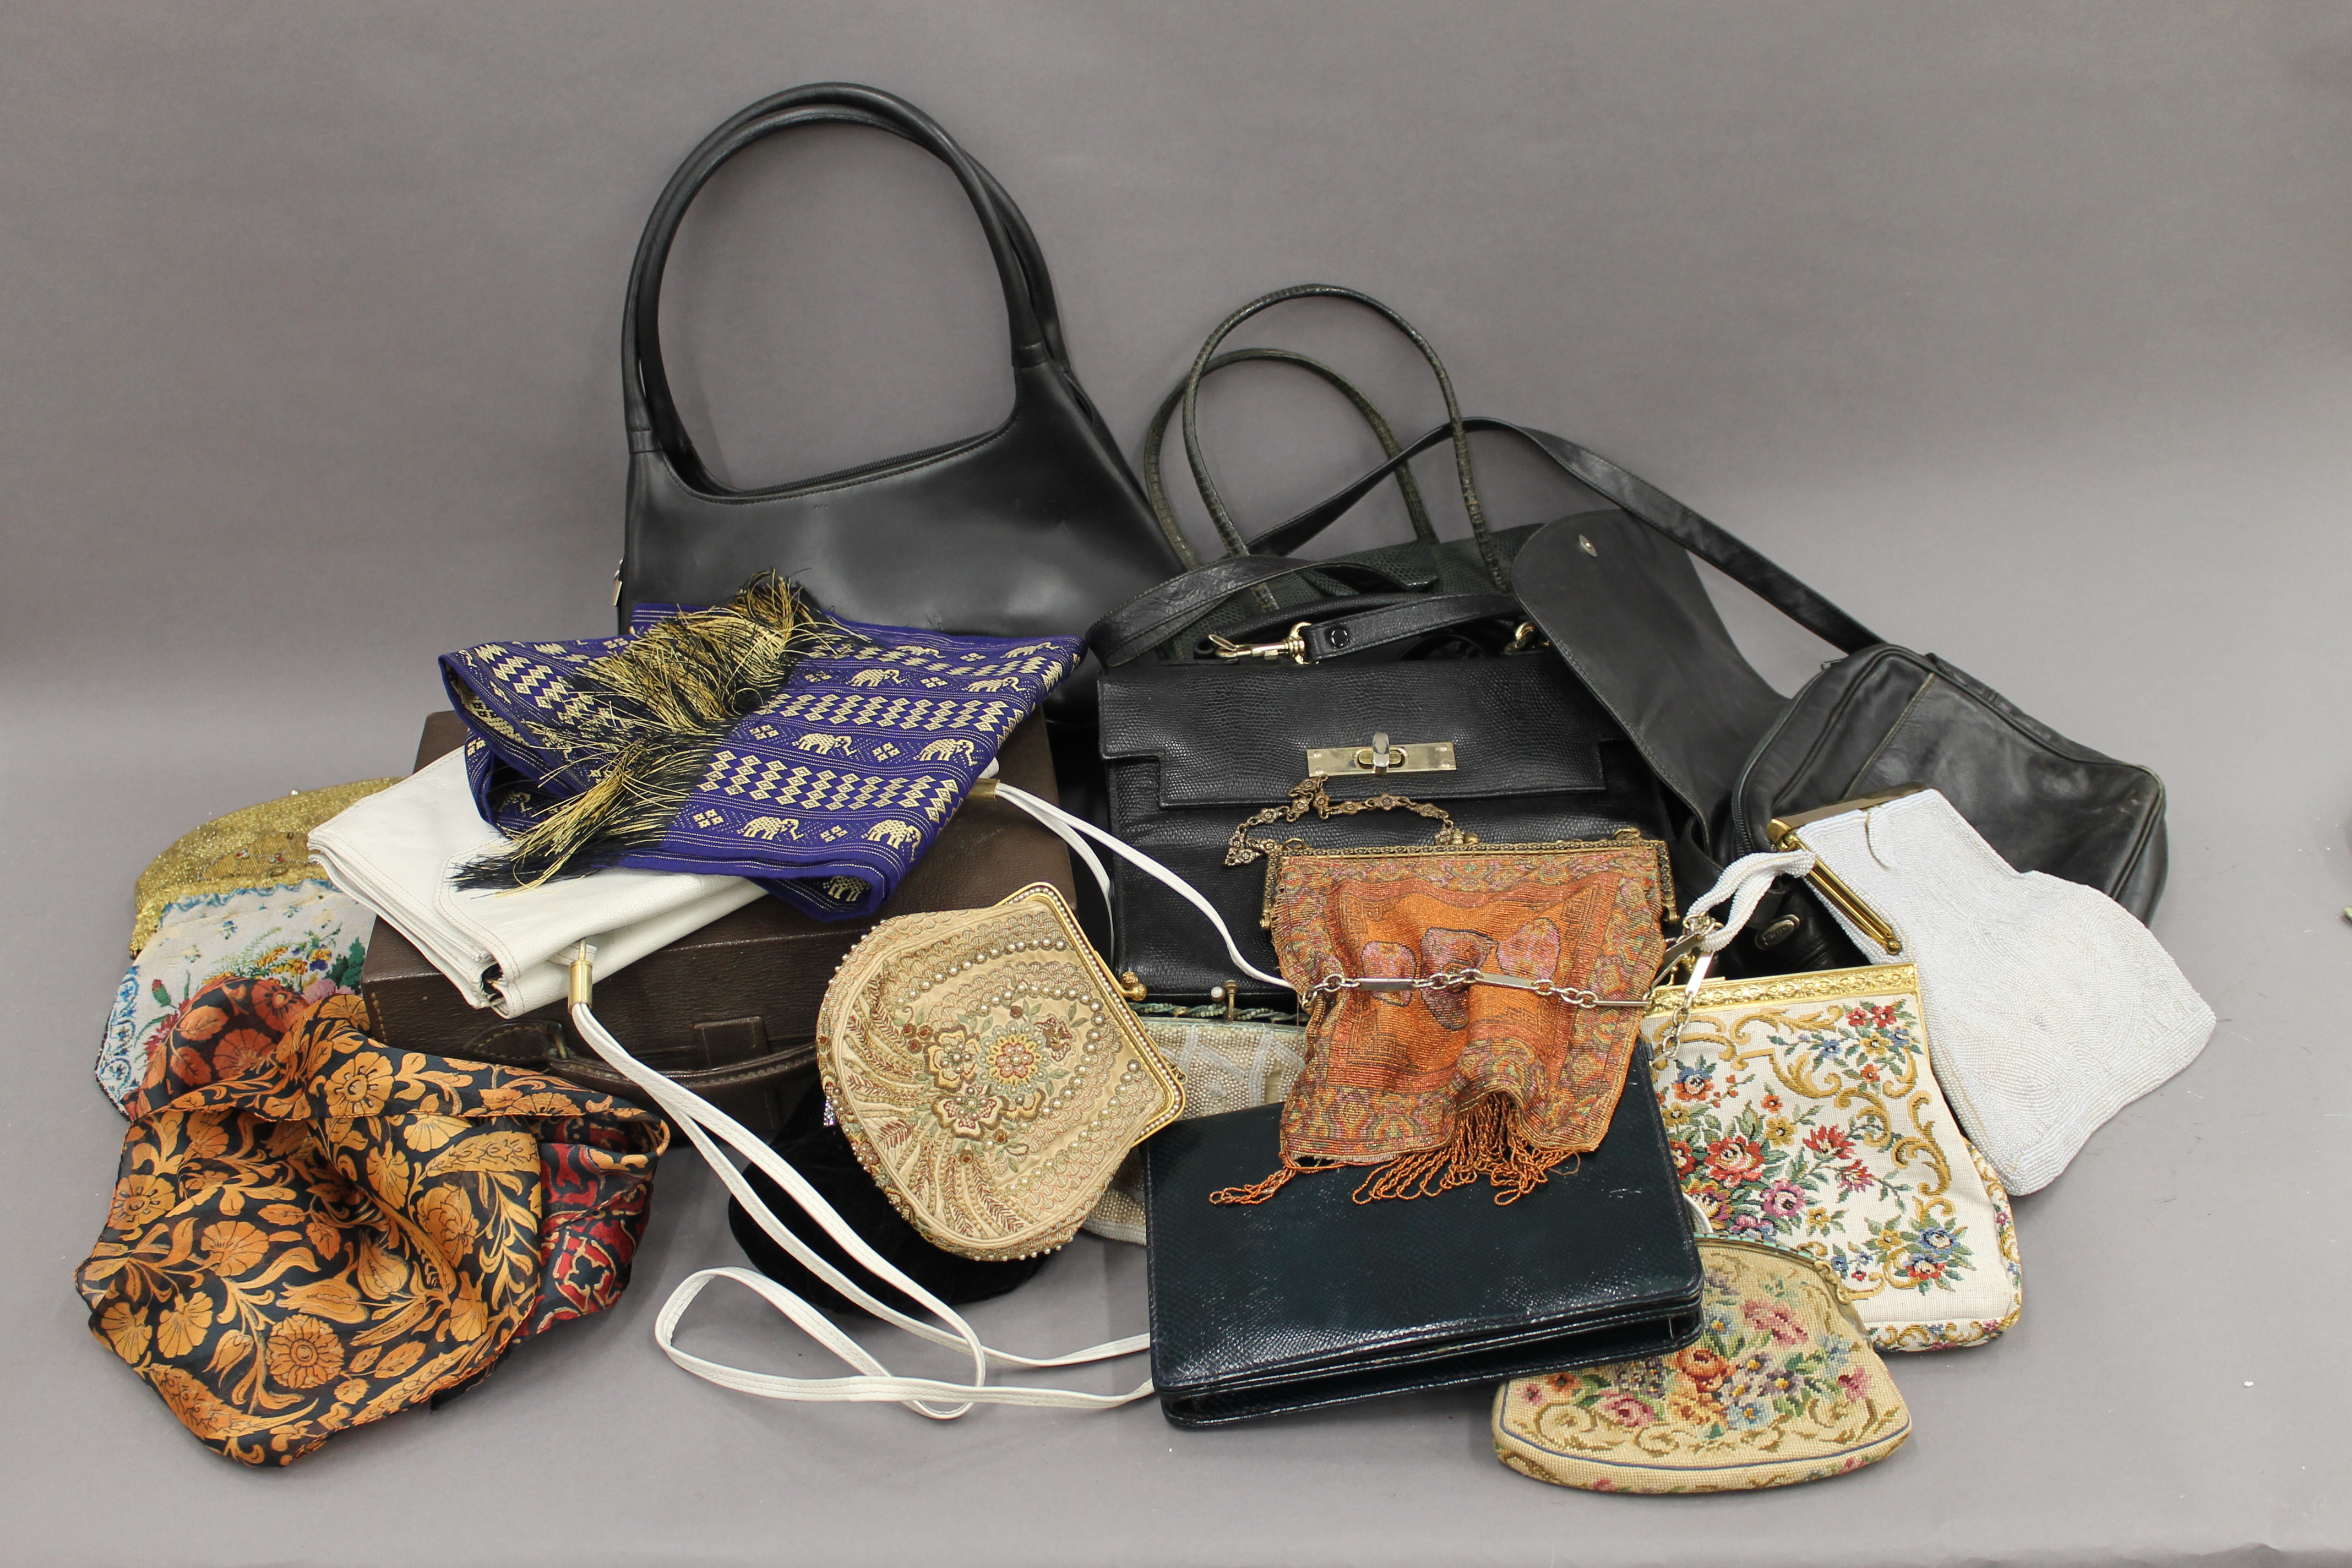 A quantity of vintage handbags and a vintage hat.